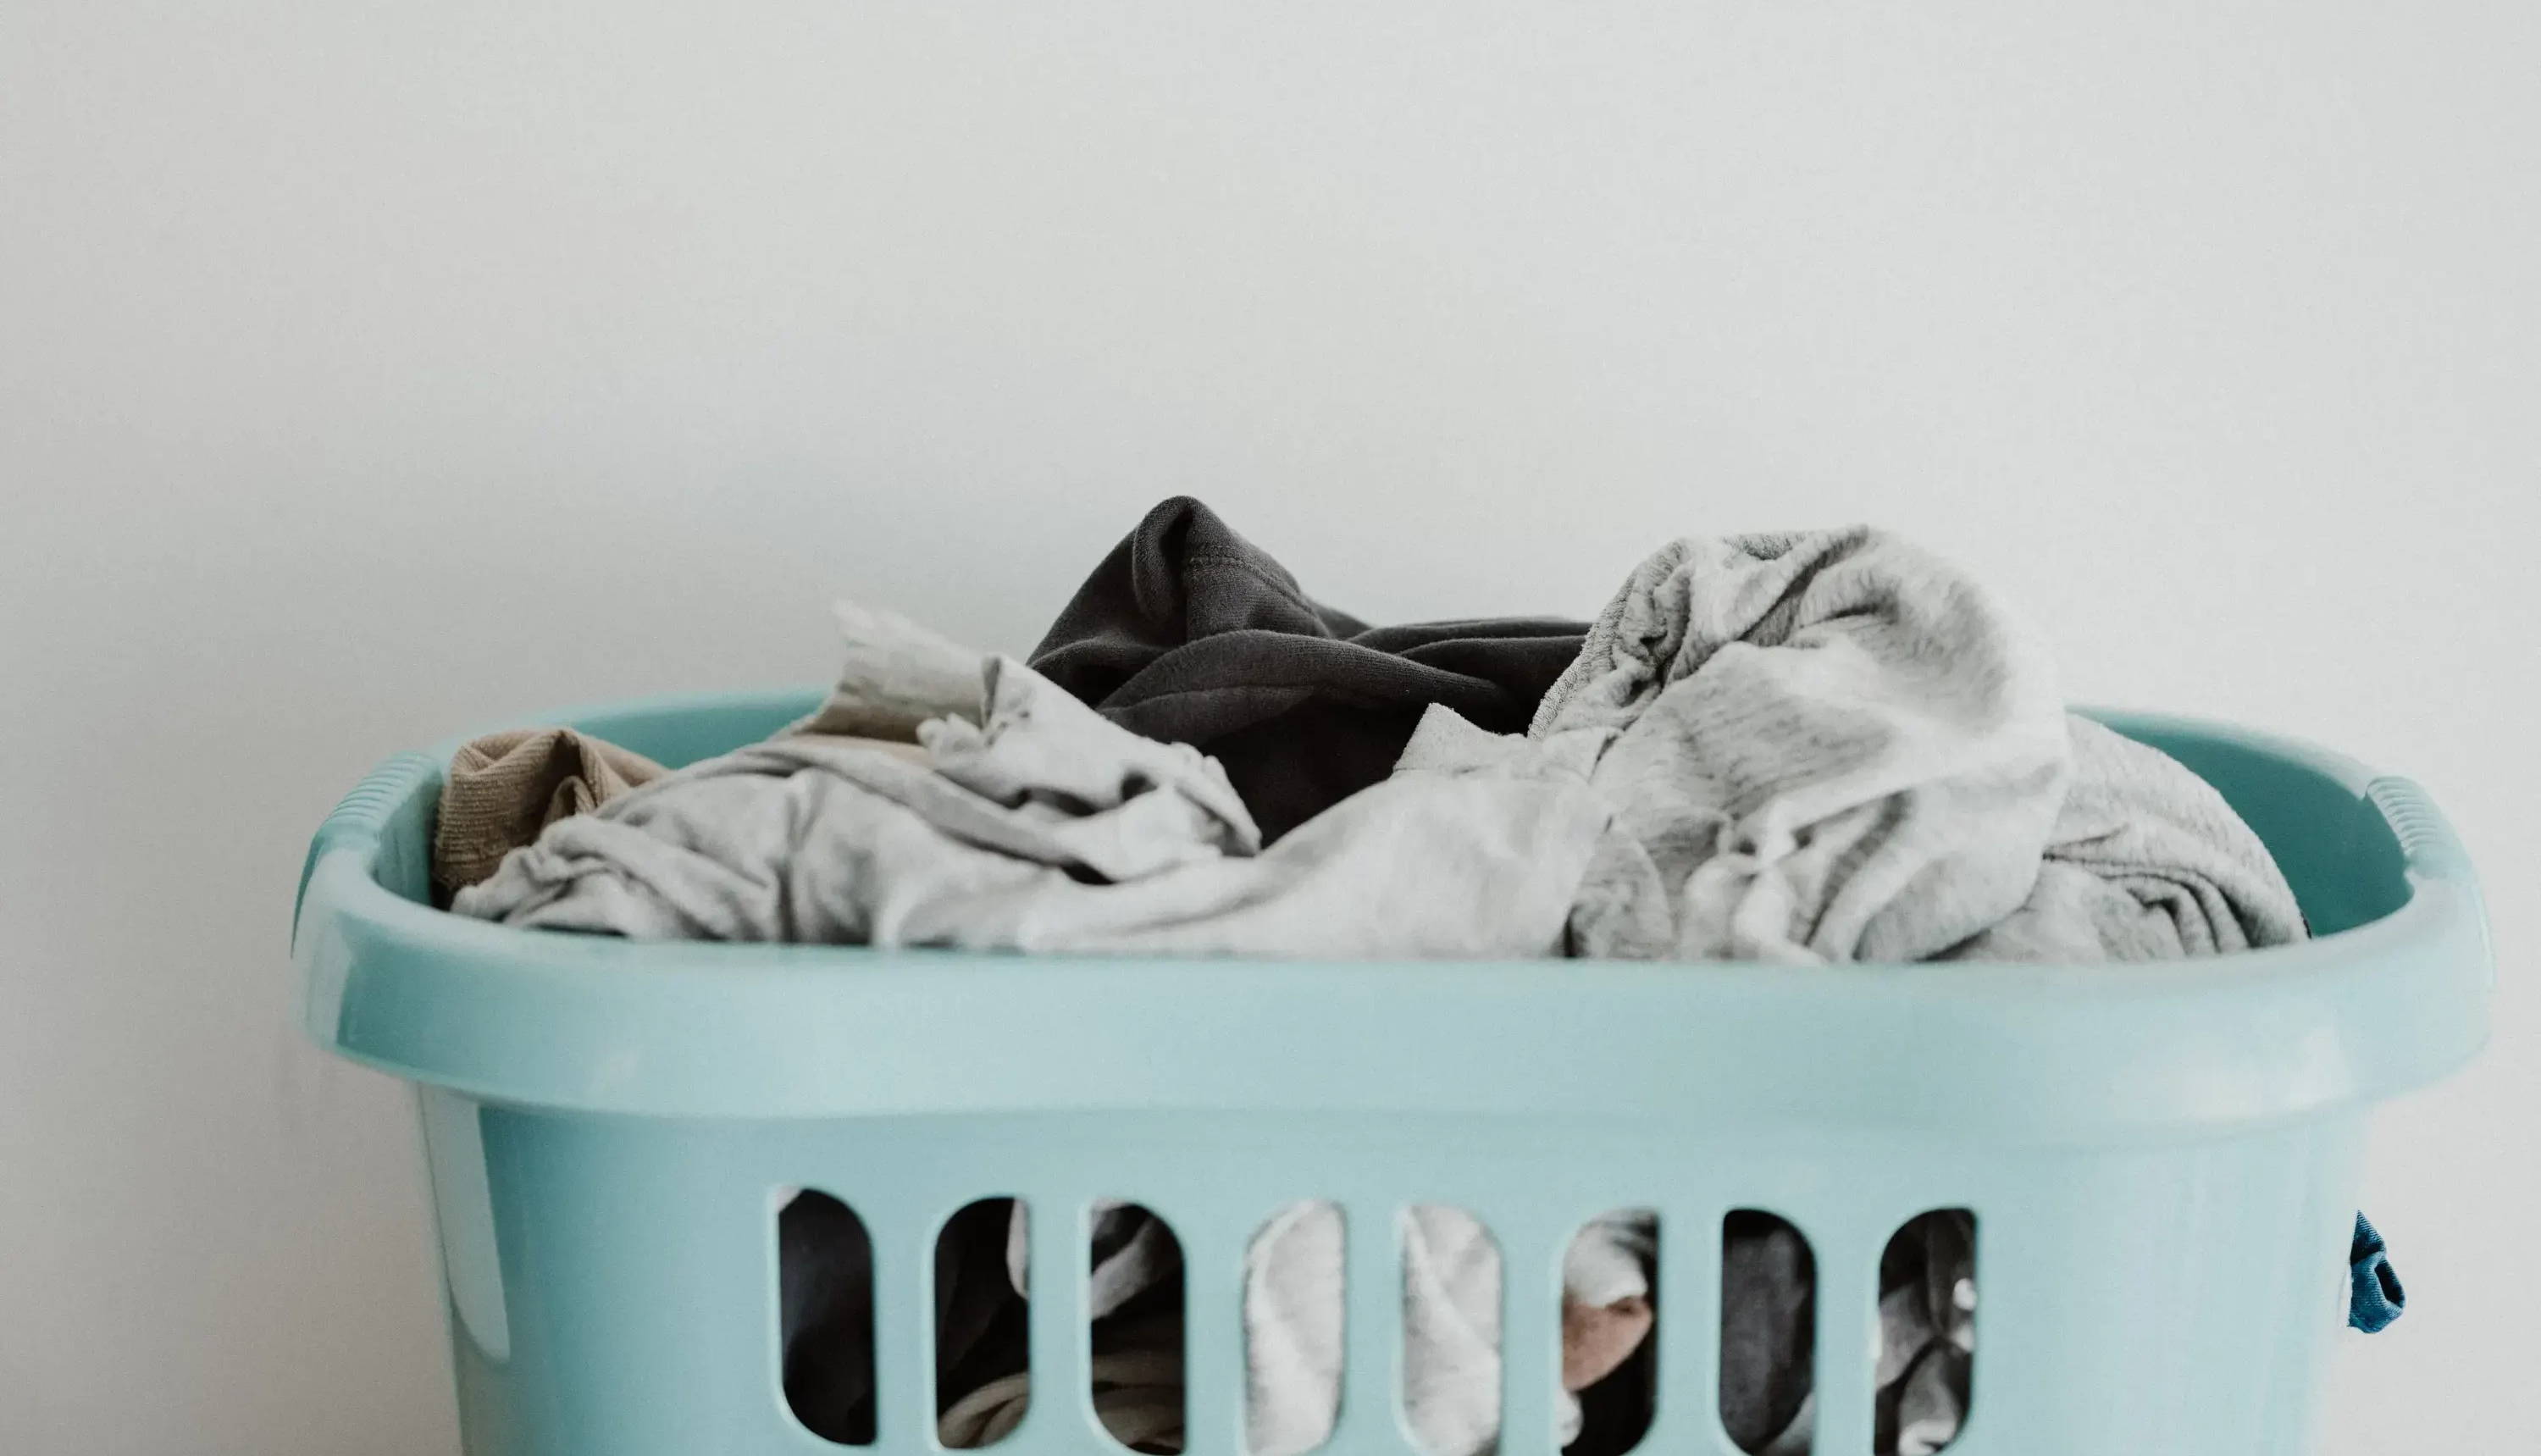 A blue laundry basket sits in front of a white surface filled with dirty clothes. Image by Annie Spratt. 